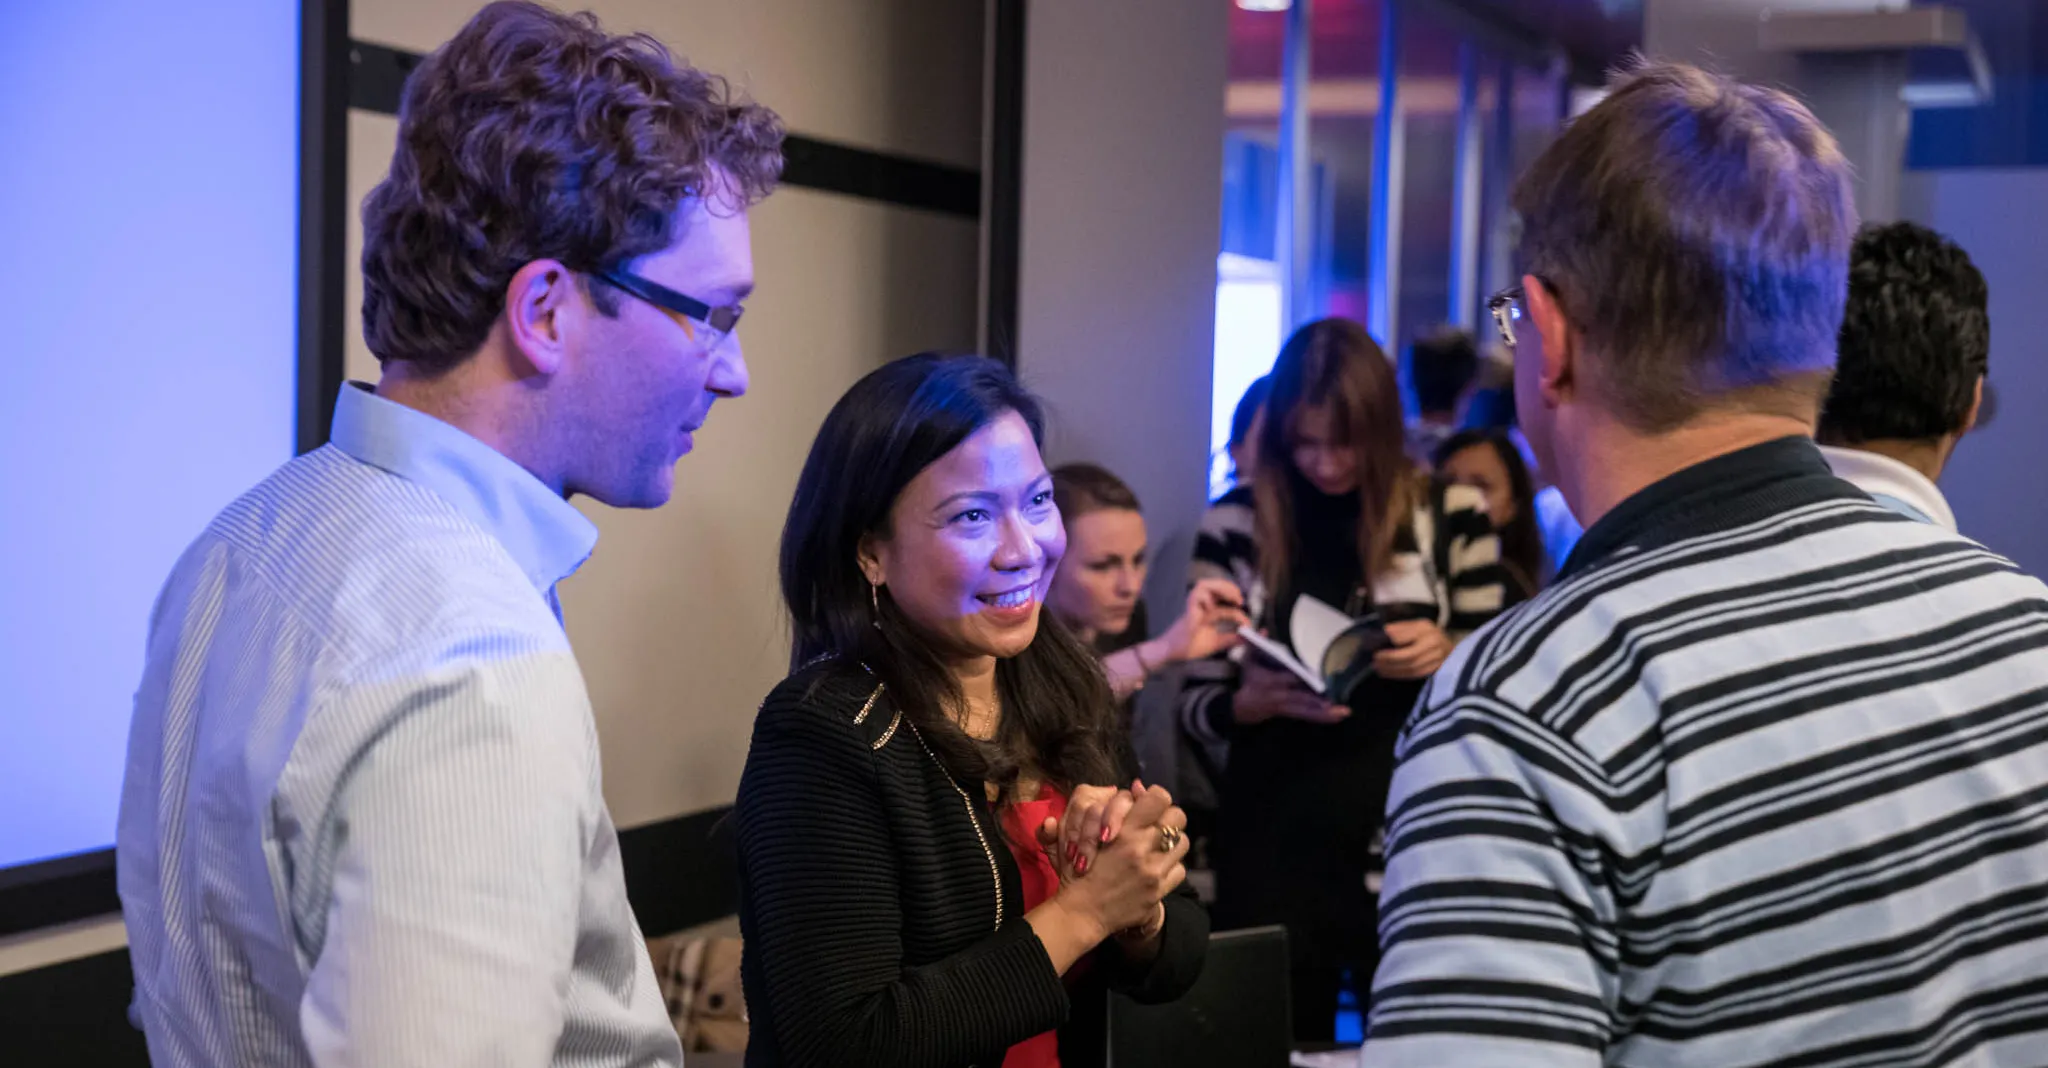 Dr. Ma Cherie Cortez meeting attendees at KIVI event in HTC Eindhoven in 2018.